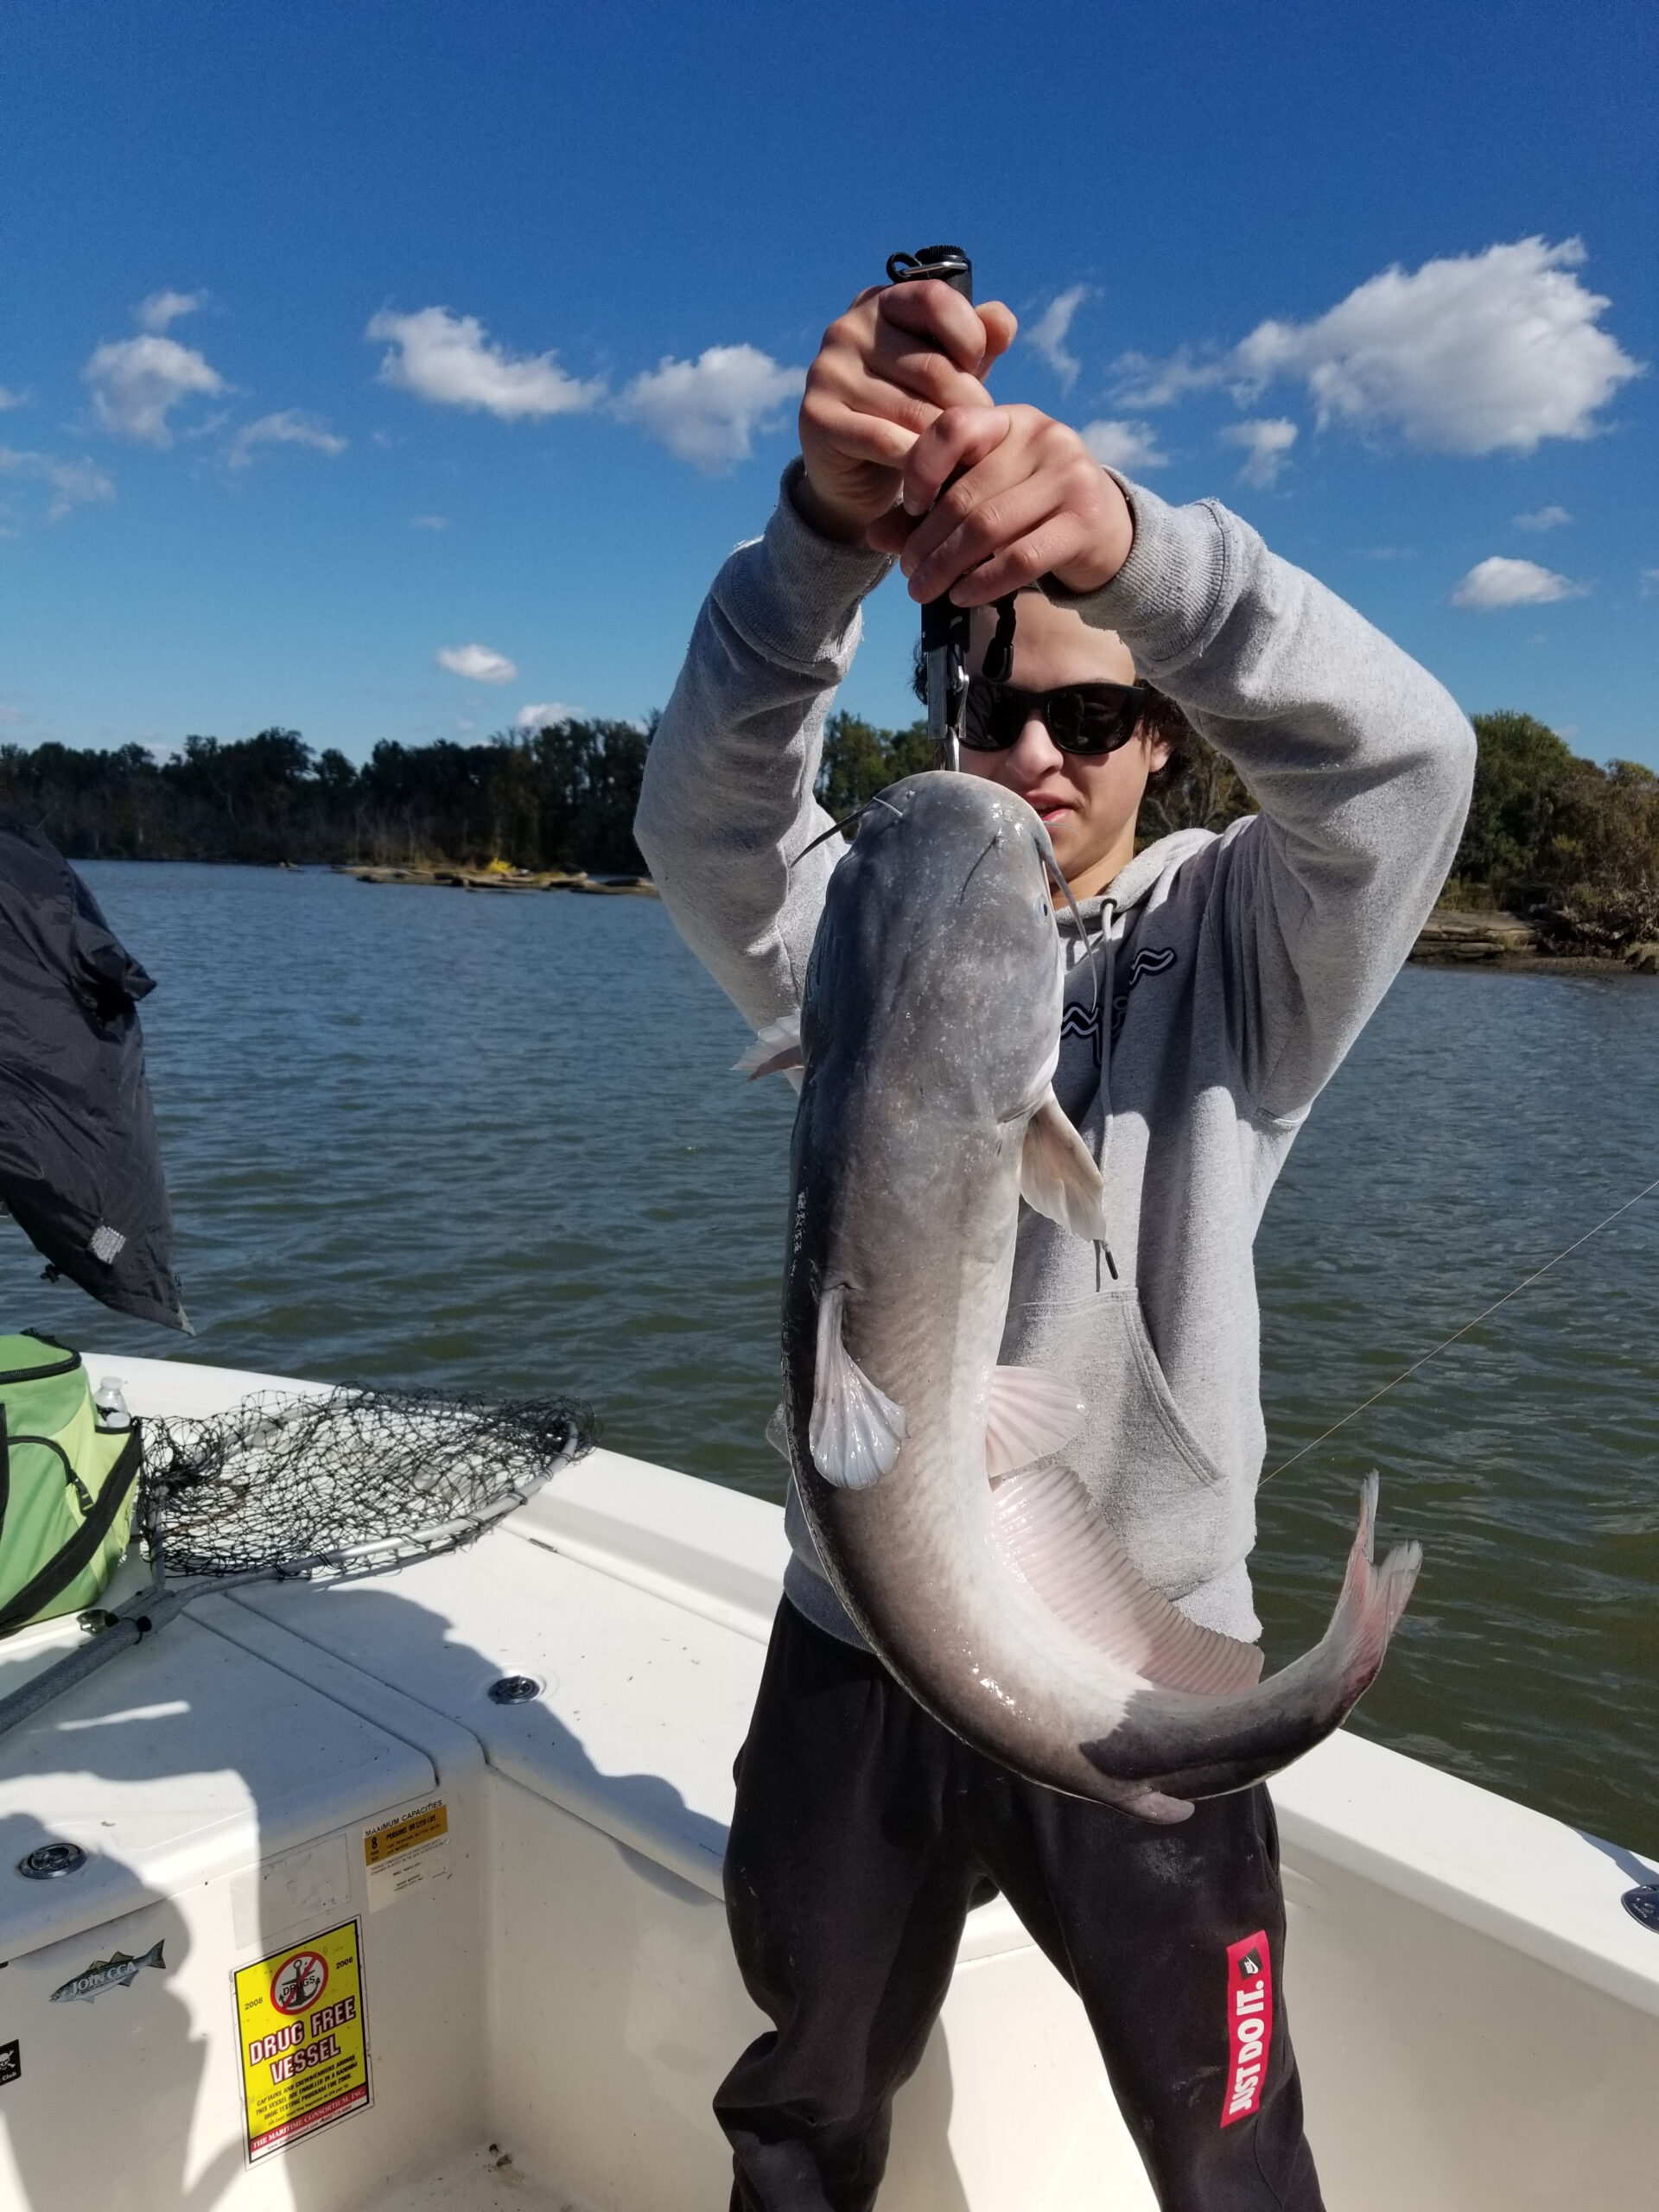 https://indianheadcharters.com/wp-content/uploads/2020/10/101720-3-scaled.jpg